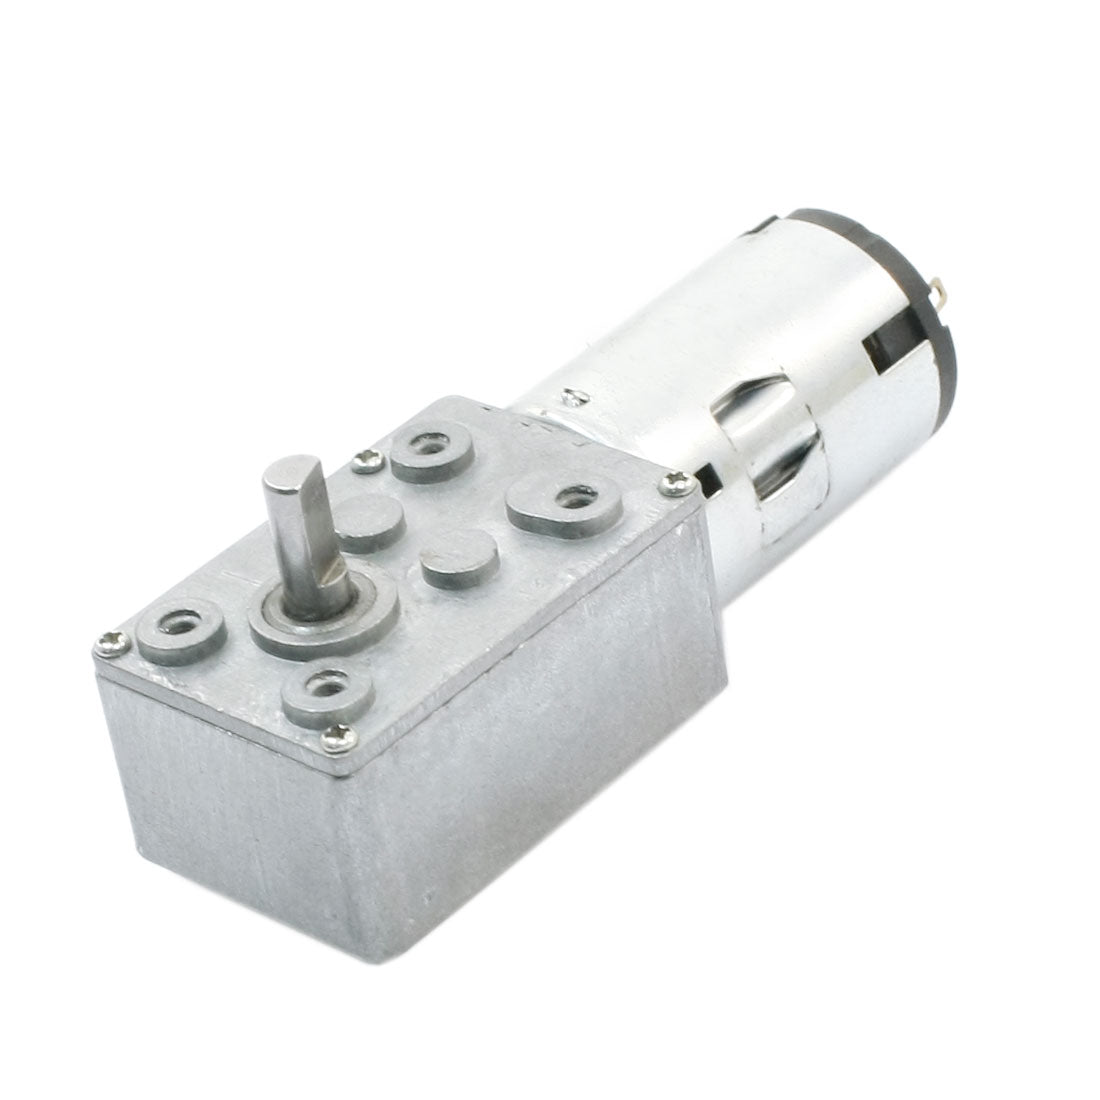 uxcell Uxcell DC 12V Connecting Reduction Ratio 11500RPM/170RPM Rotary Speed Reducer High Torque Worm Geared Box Motor